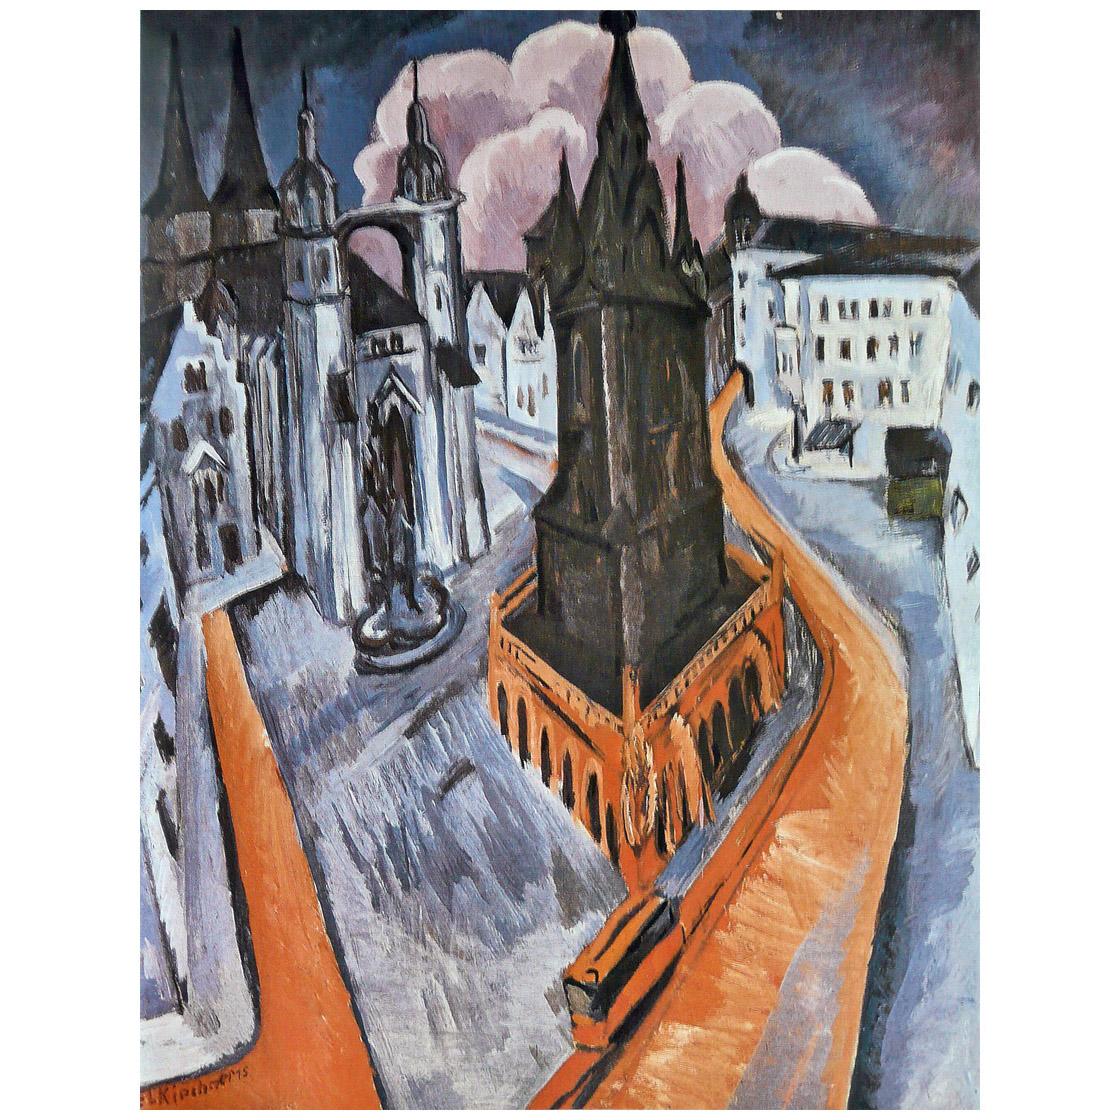 Ernst Ludwig Kirchner. The Red Tower of Halle. 1915. Museum Folkwang Essen